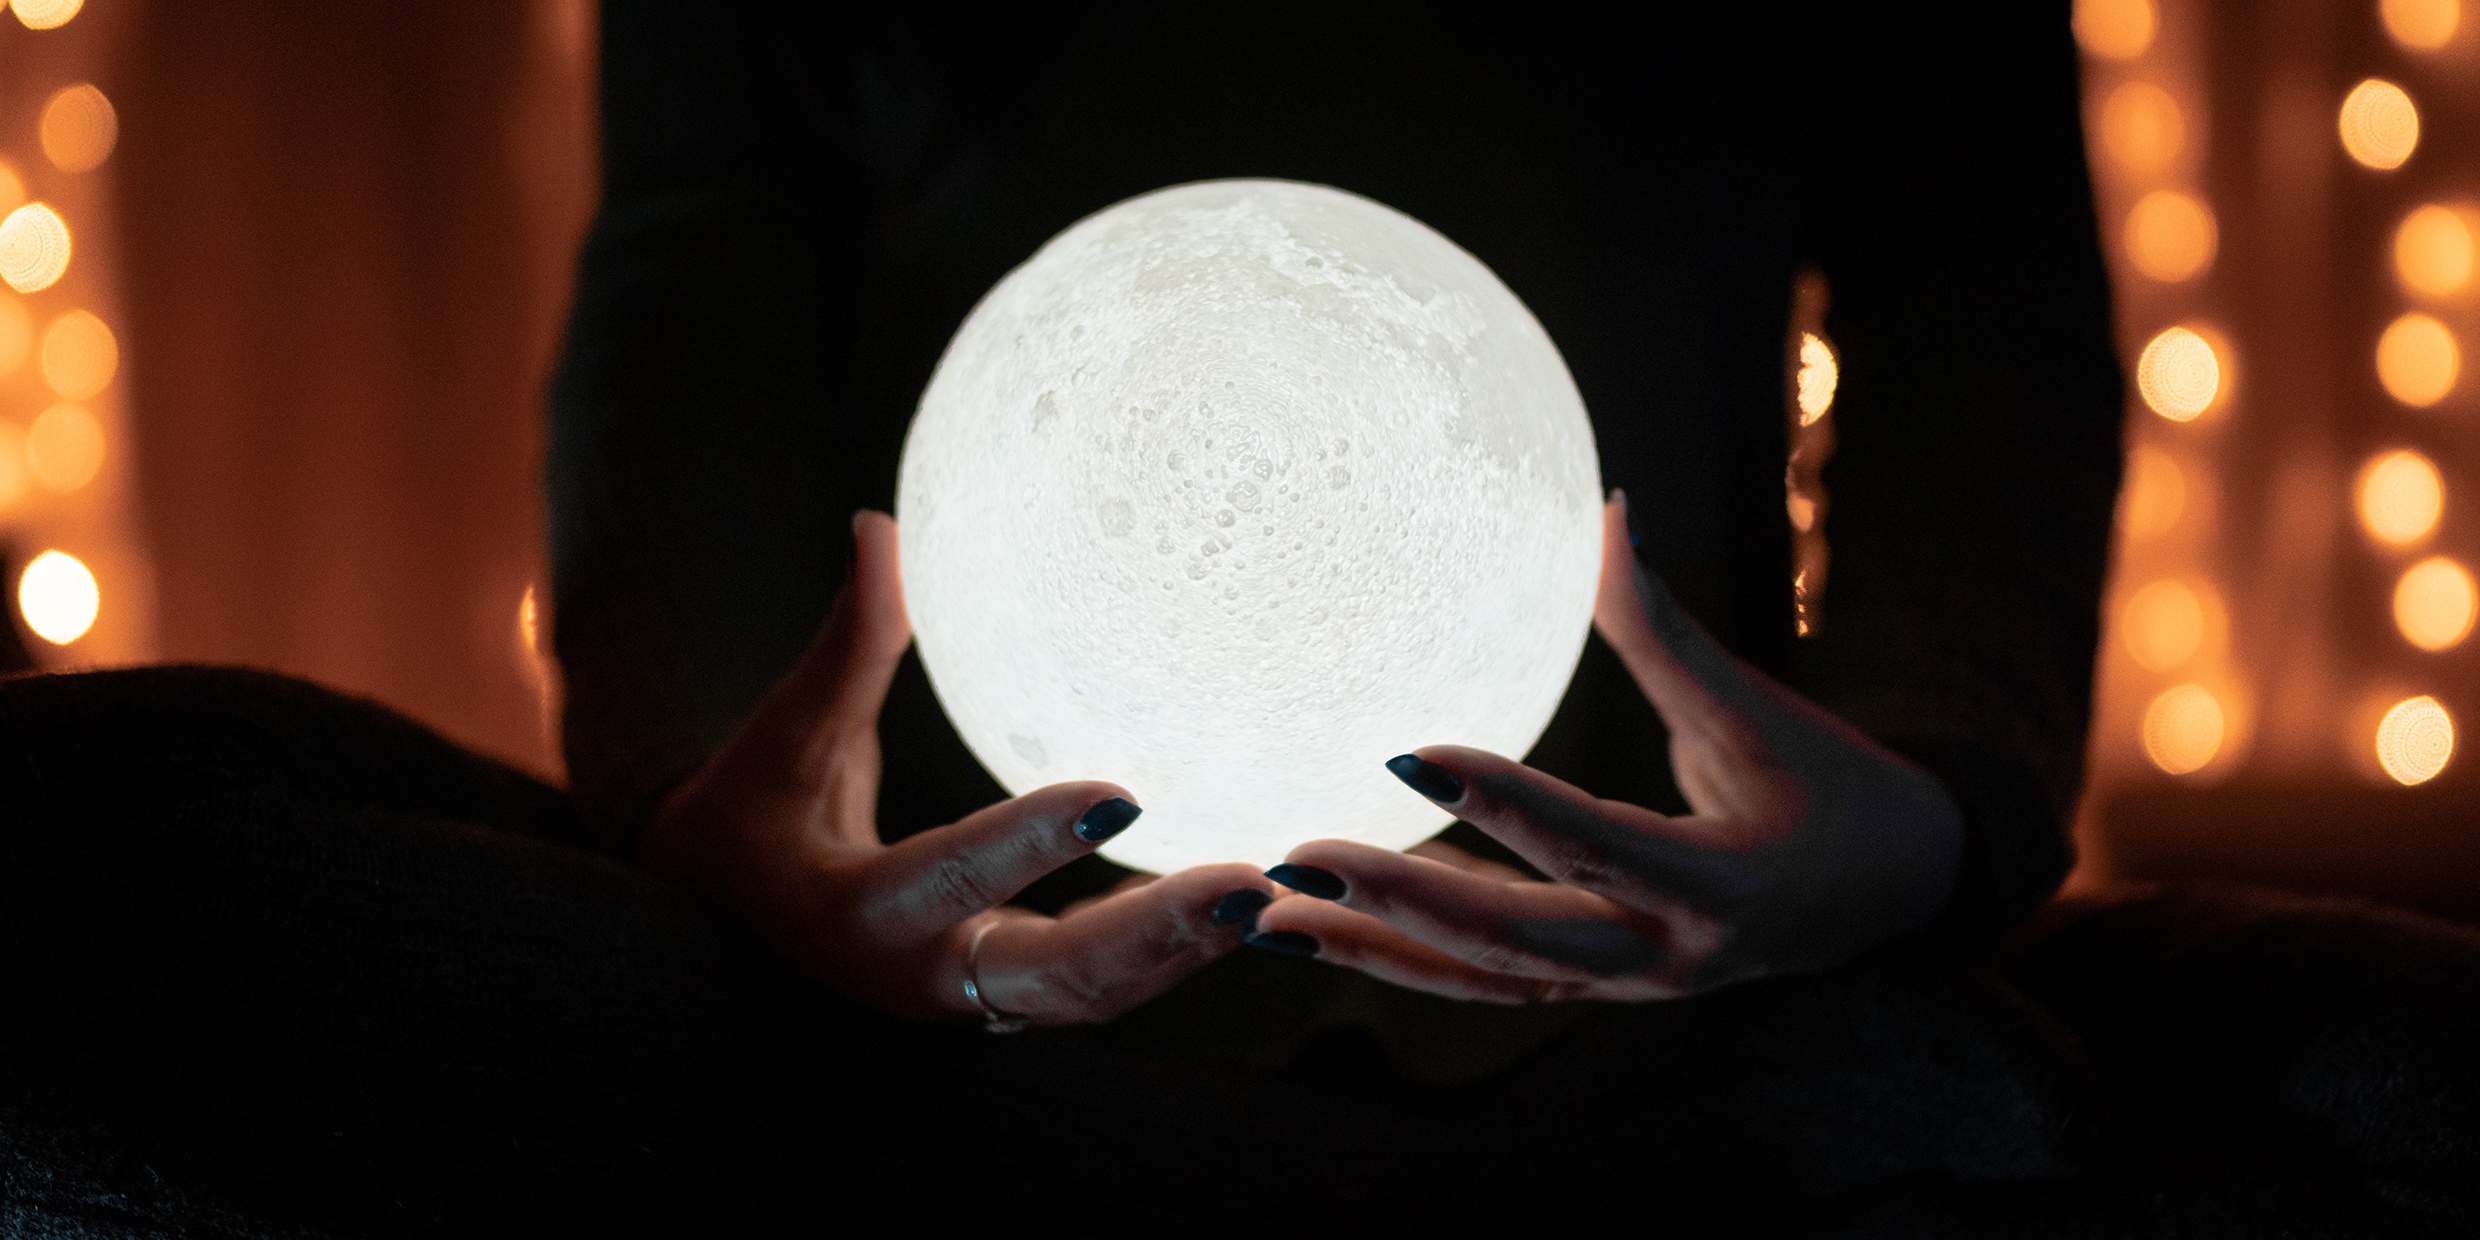 Image of a glowing orb held in a woman's hands